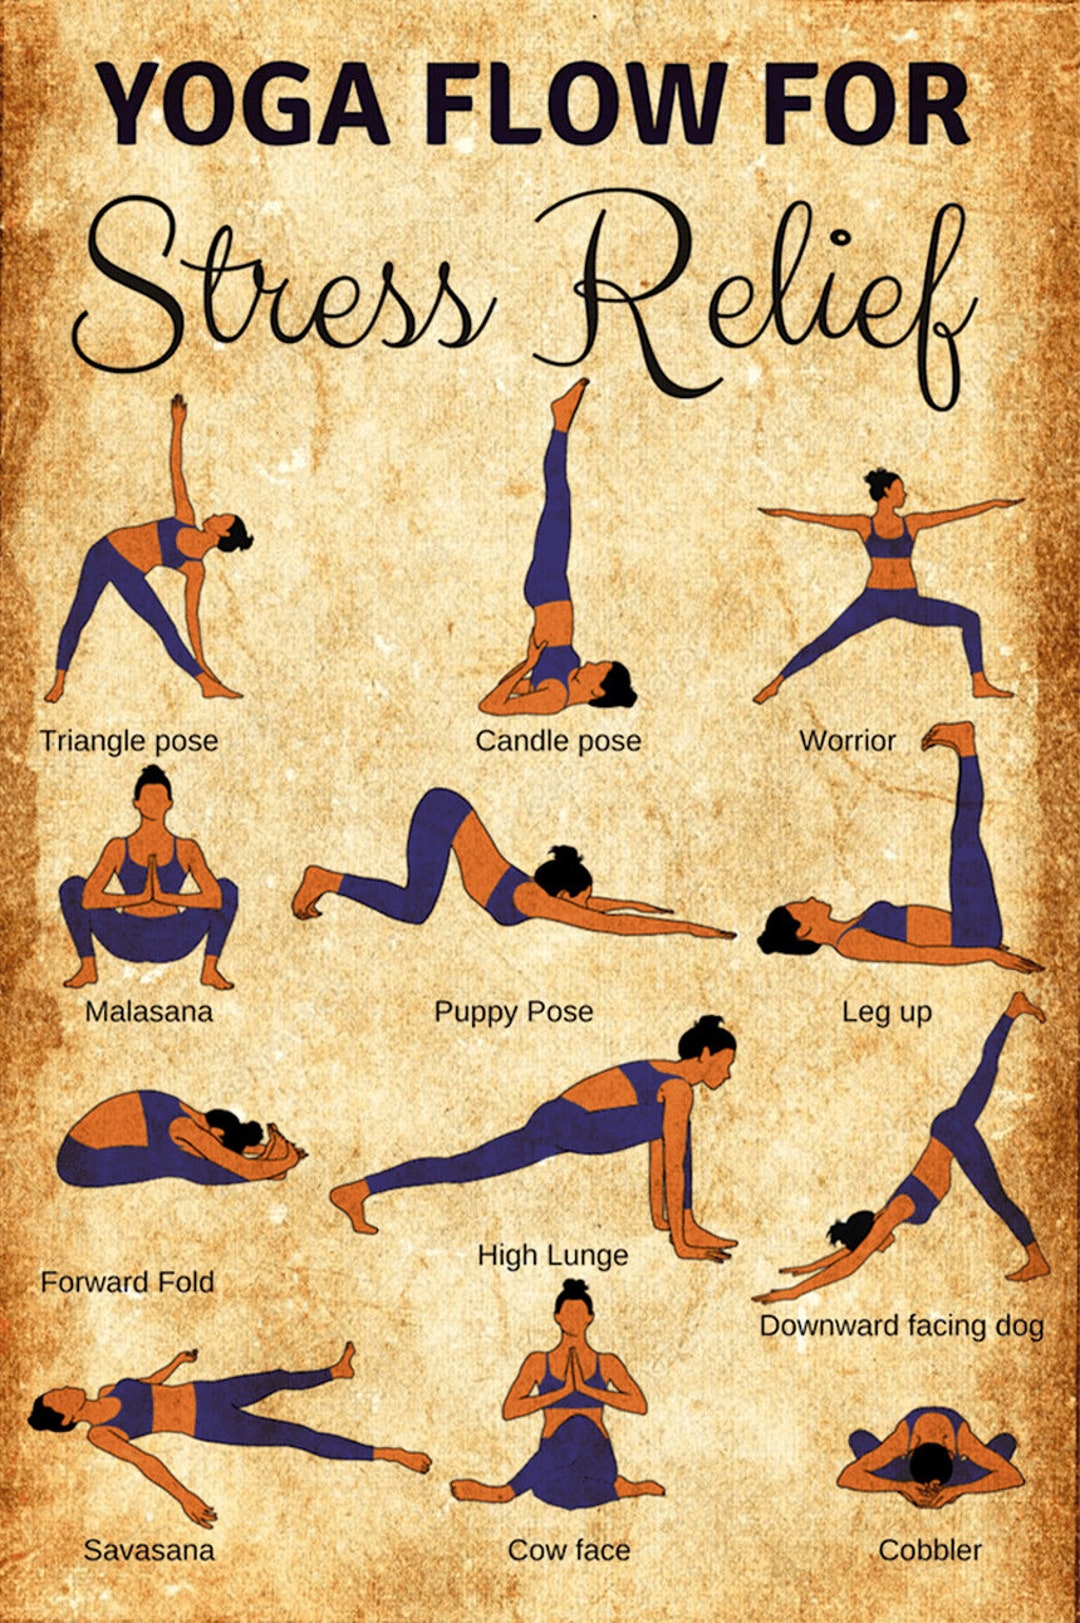 Yoga Lover Yoga Poses Yoga Flow for Stress Relief Poster Wall